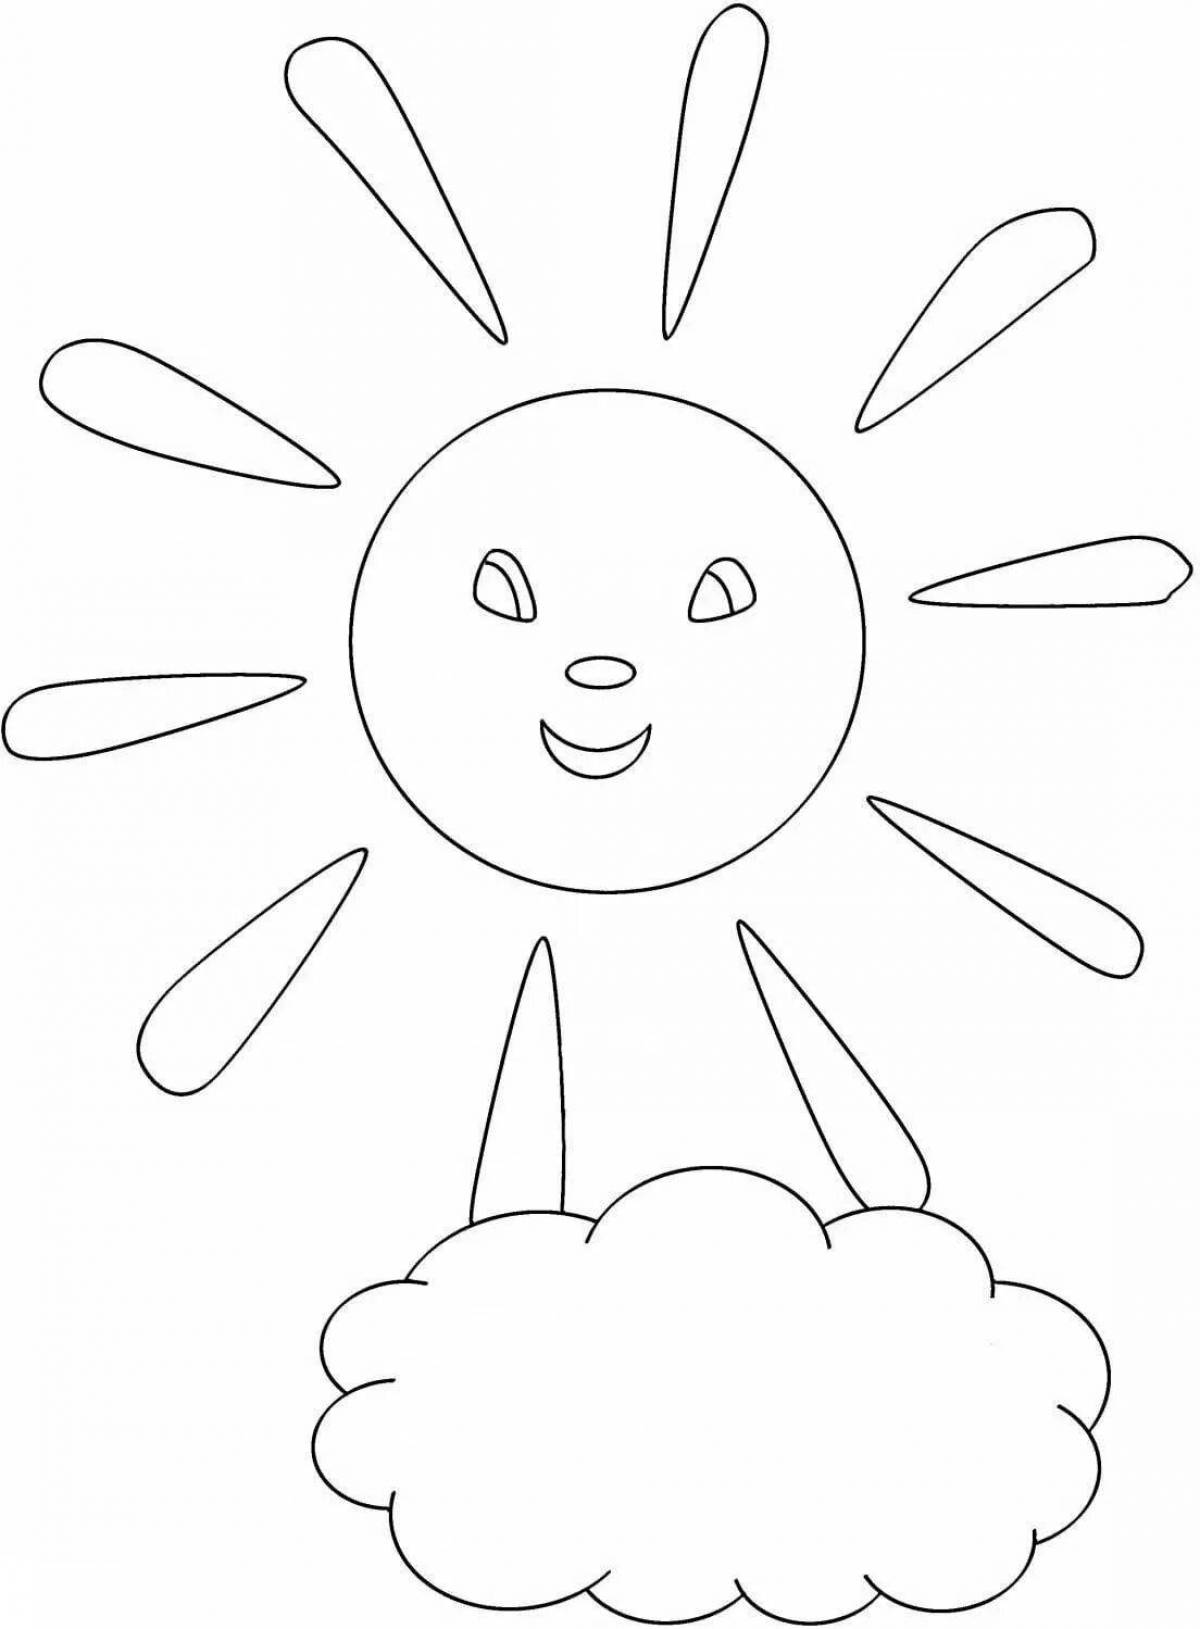 Glowing sun coloring book for children 4-5 years old